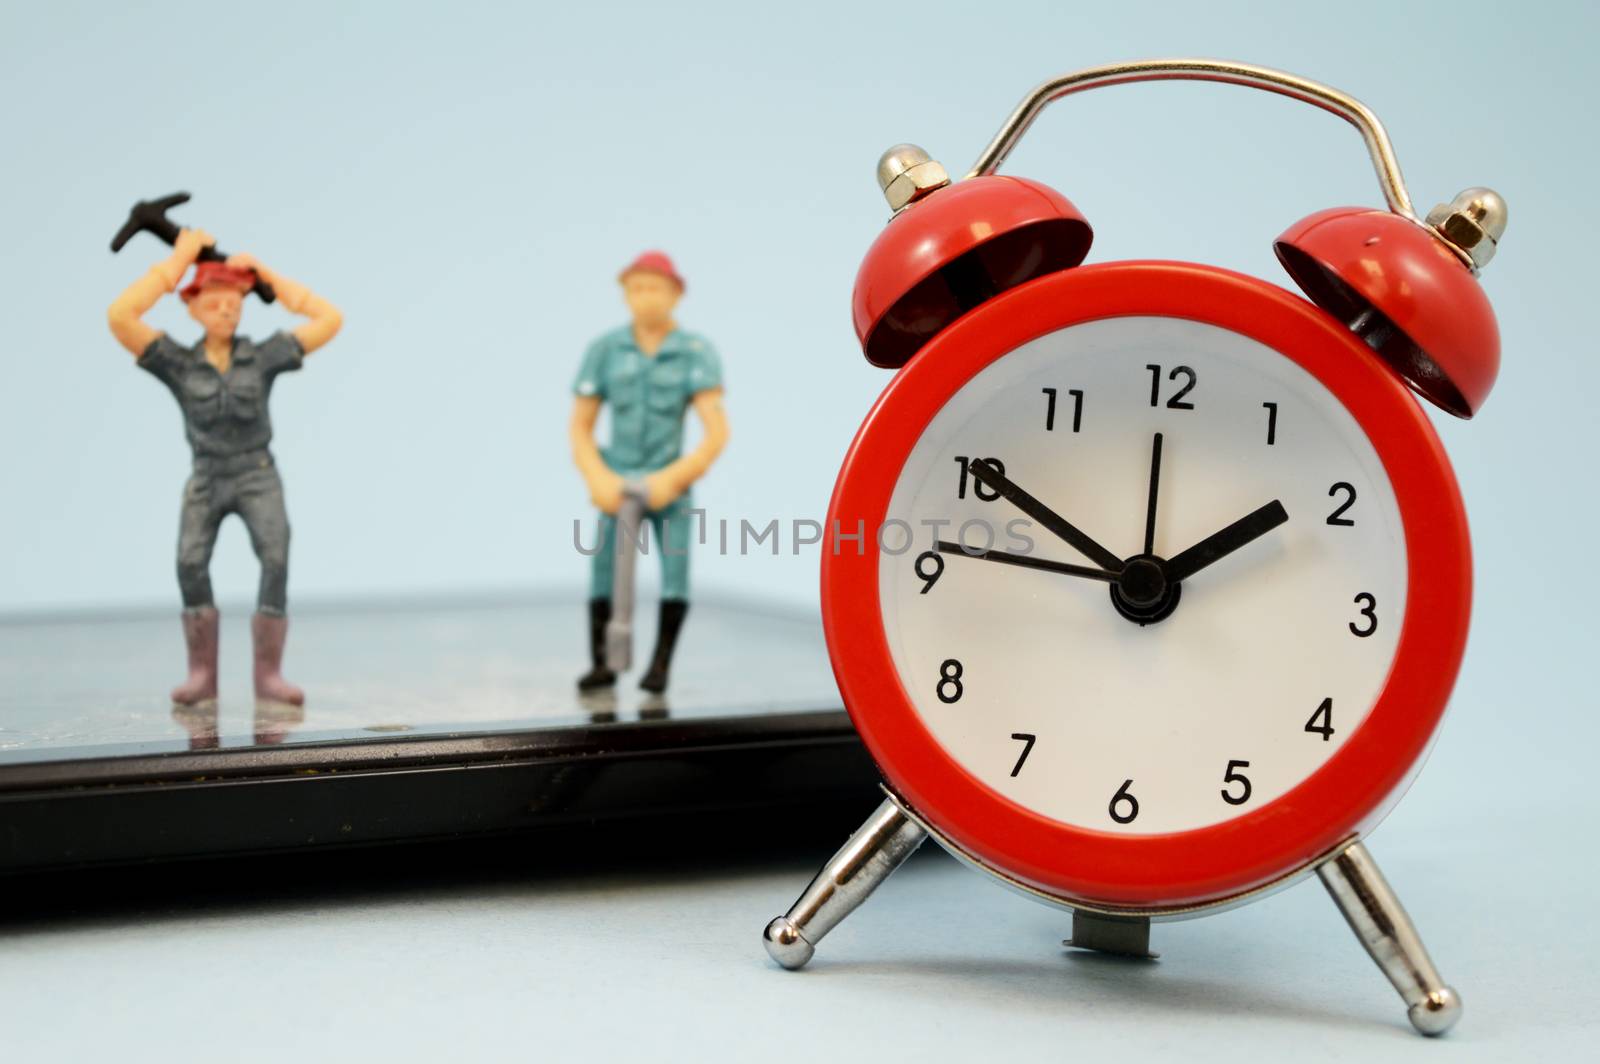 An illustrative concept showing some miniature labor workers or technical support hard at work on a damaged digital device with a red clock being the main plane of camera focus.